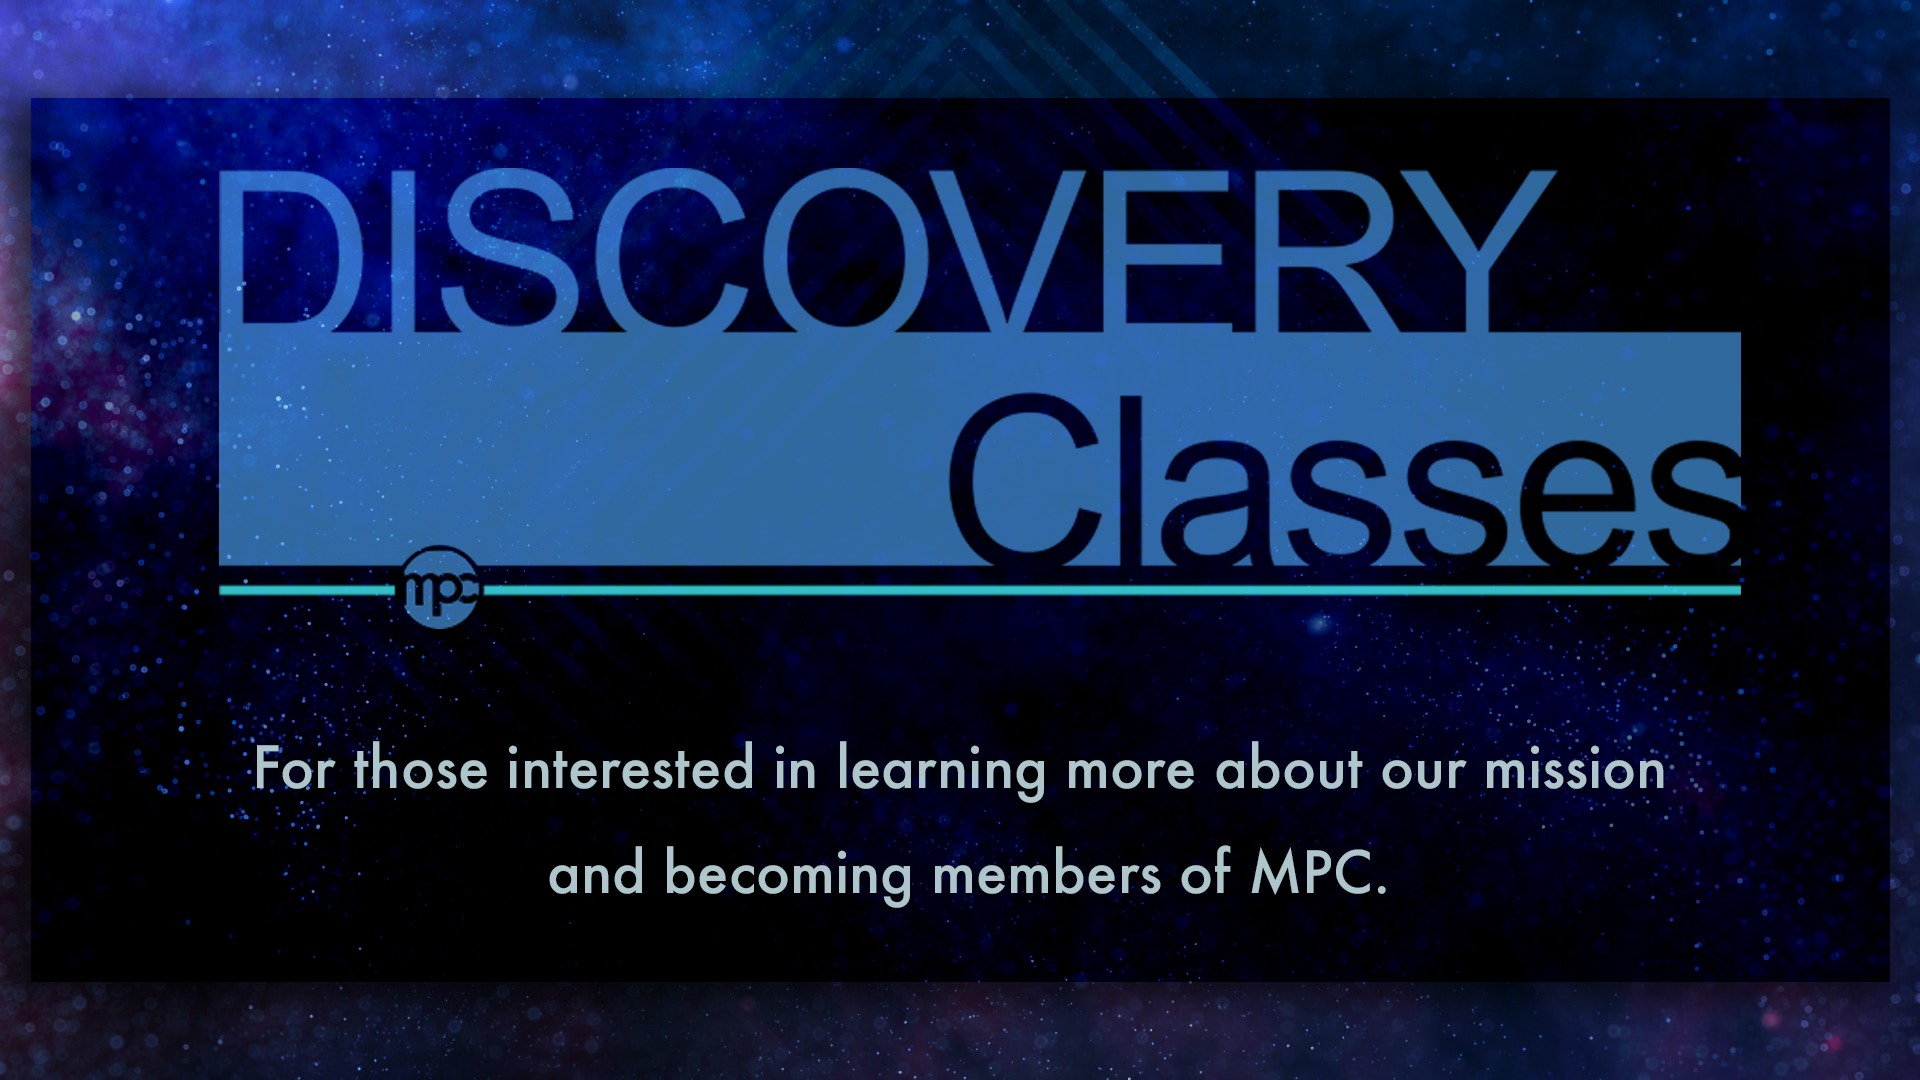 Discovery Class

Our Discovery class is for those interested in learning more about our mission and becoming members at MPC.
